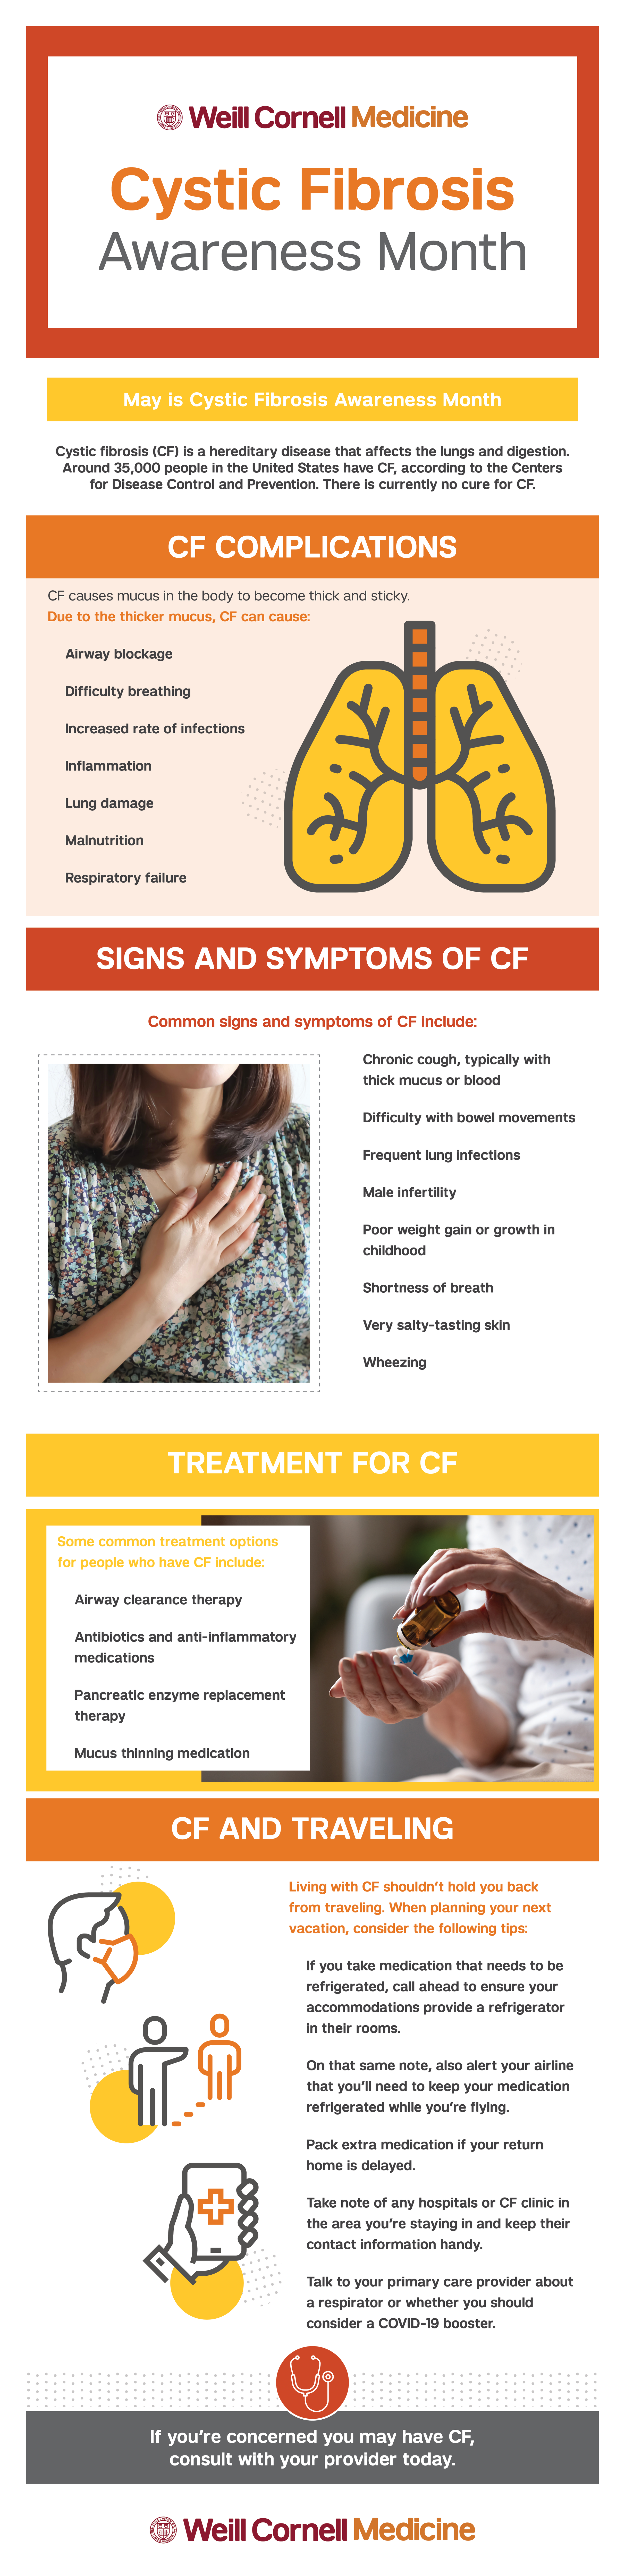 May is Cystic Fibrosis Awareness Month